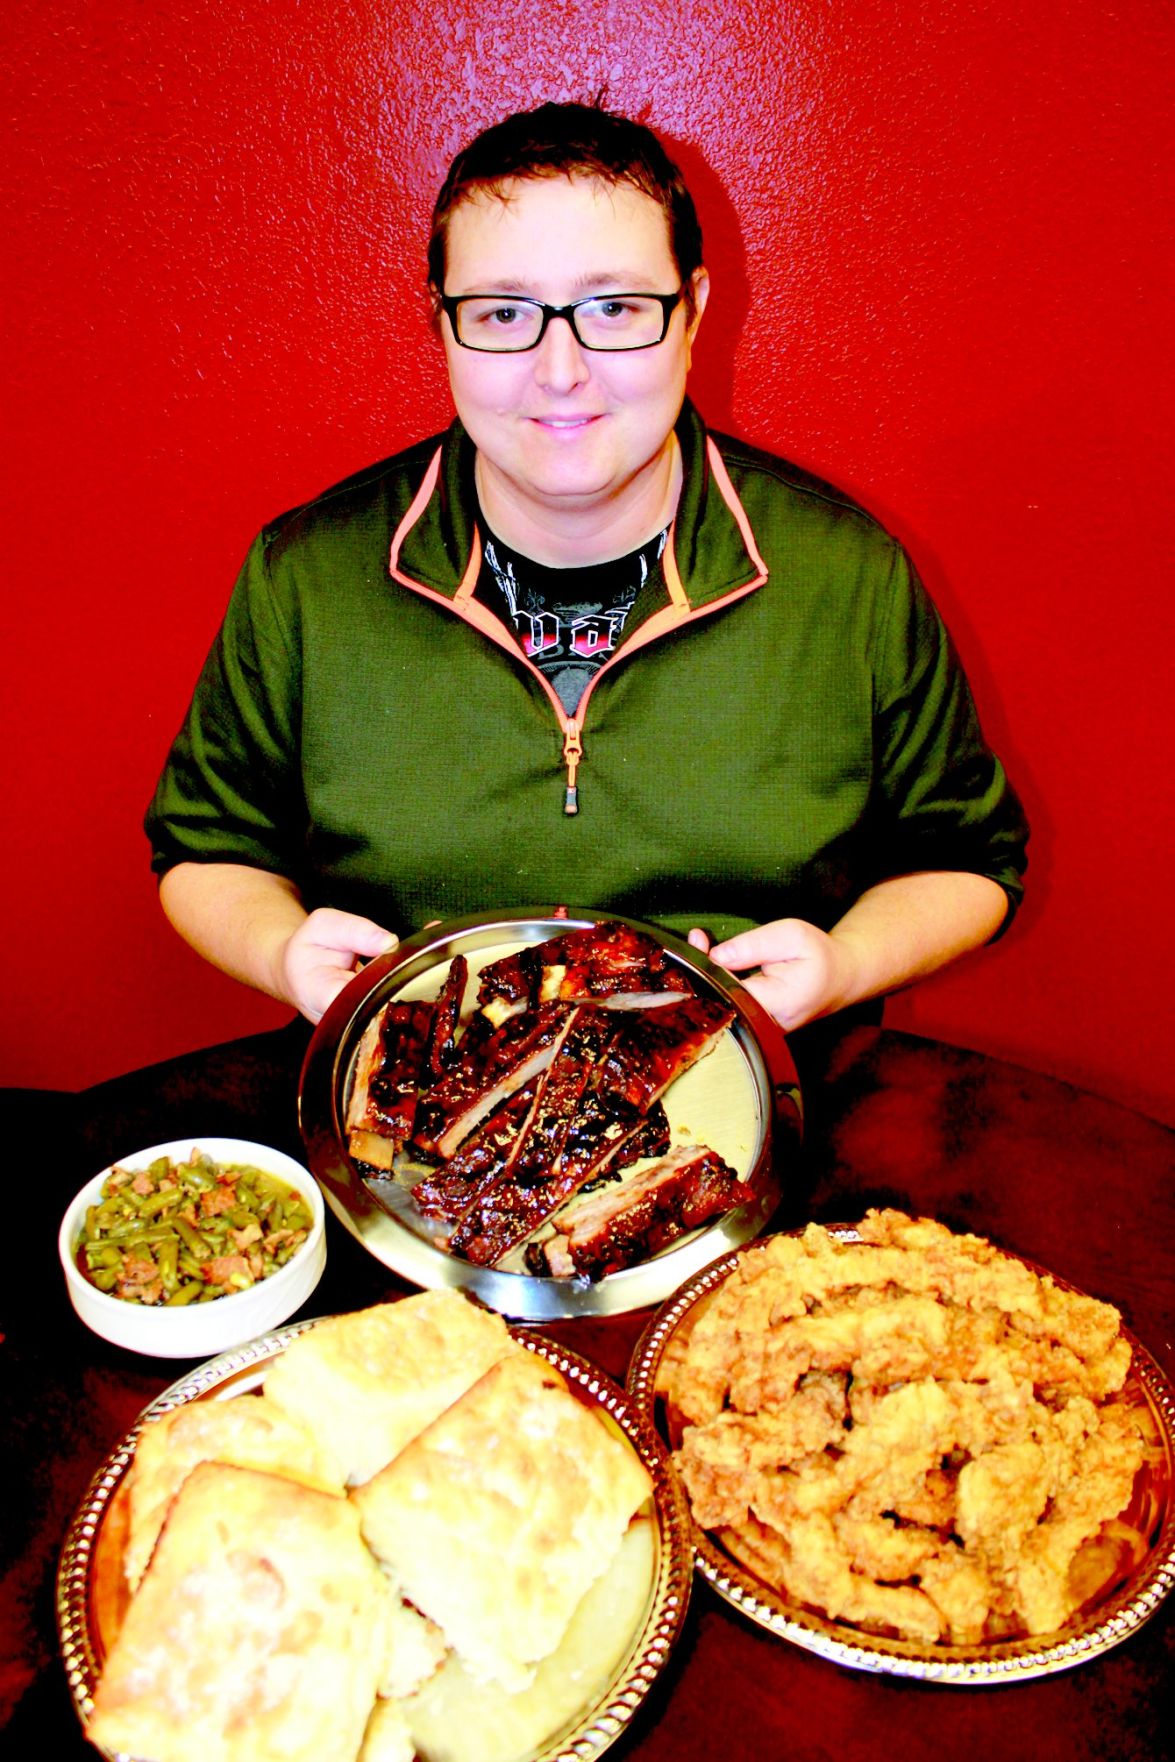 Amateur chef ready for cook-off Lifestyles muskogeephoenix